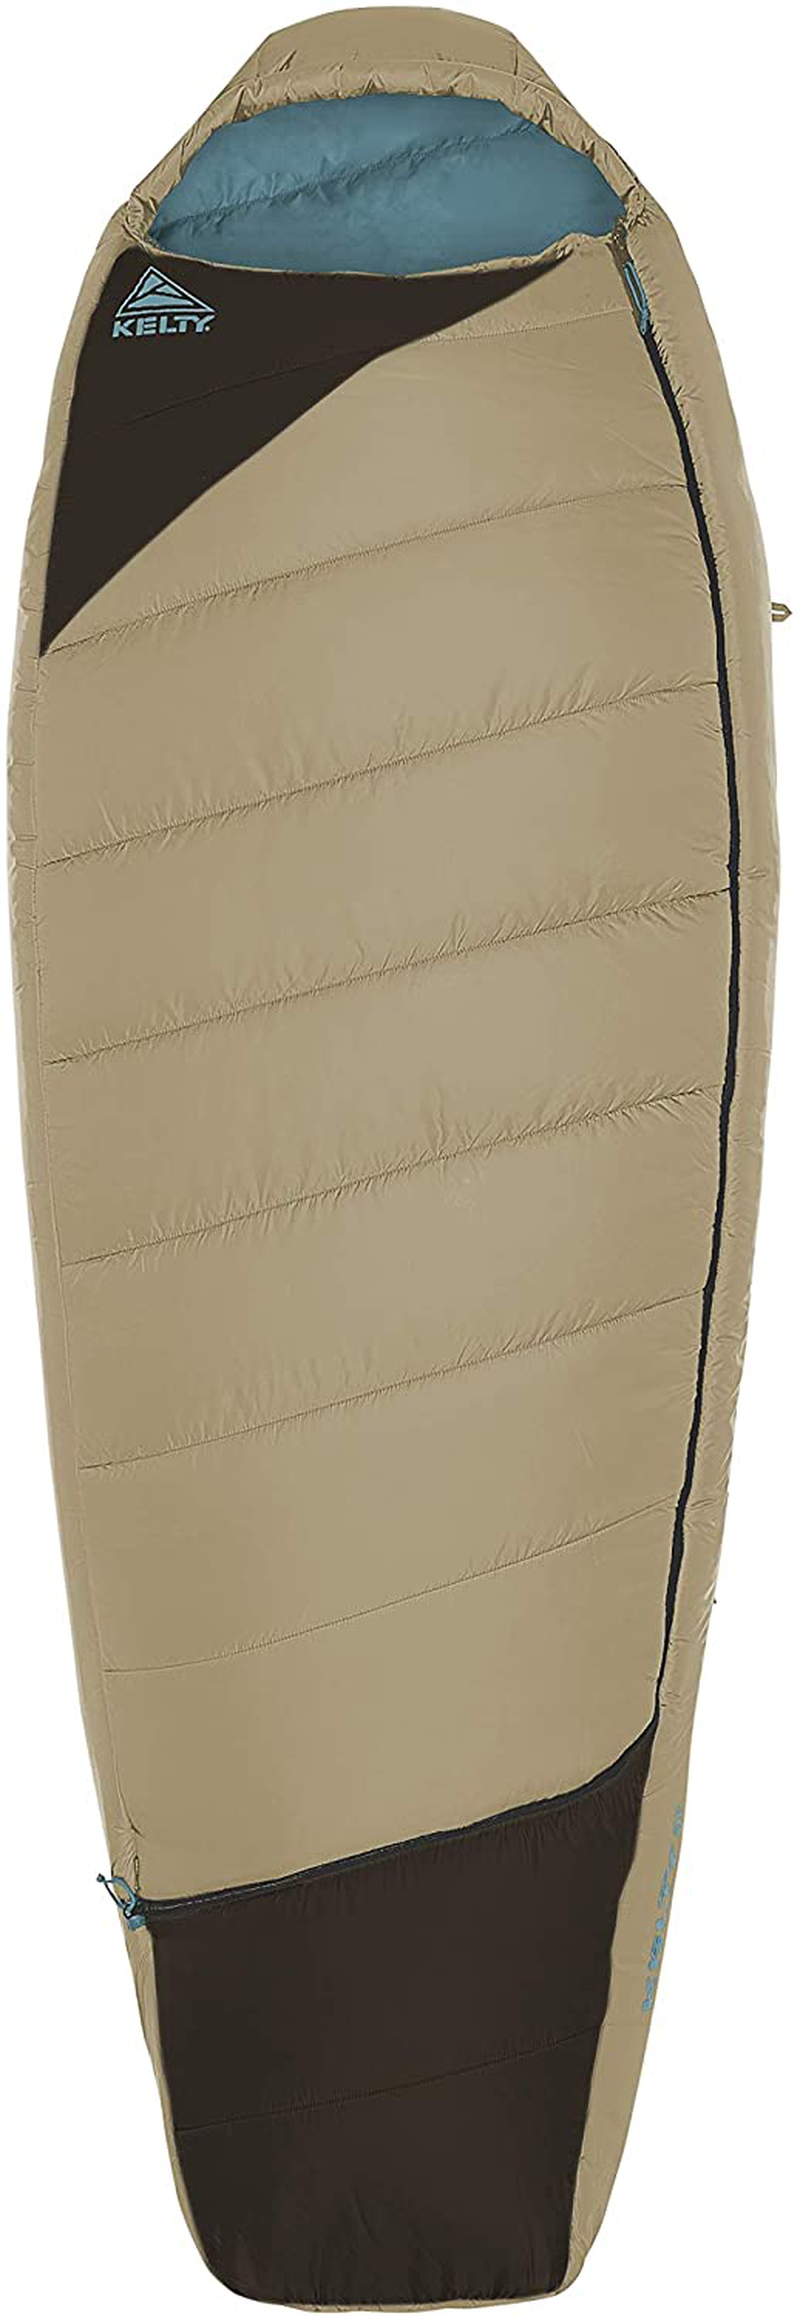 Kelty Tuck Synthetic Mummy Sleeping Bag (2020 Update) Sporting Goods > Outdoor Recreation > Camping & Hiking > Sleeping BagsSporting Goods > Outdoor Recreation > Camping & Hiking > Sleeping Bags Kelty 20 Degree - Women's  